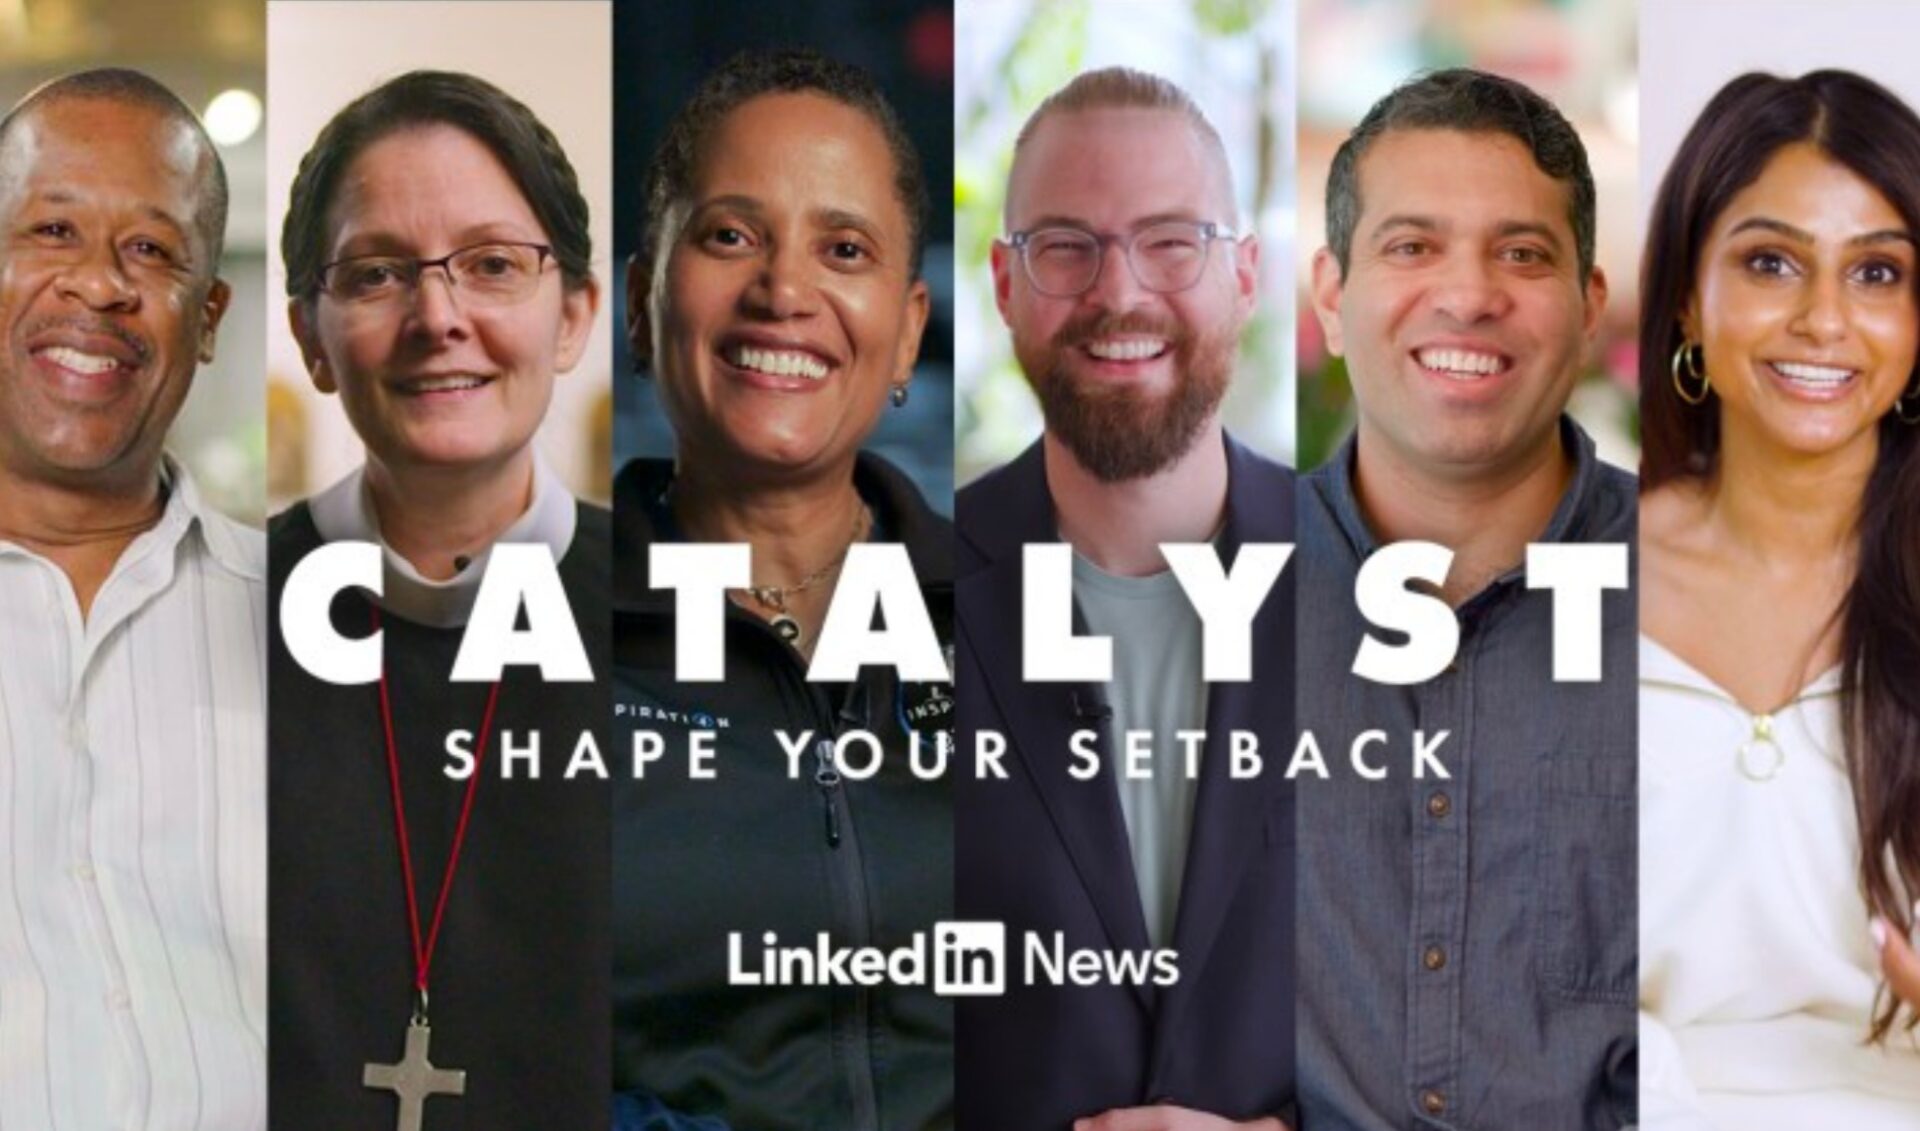 In LinkedIn’s latest original series, business leaders remember the challenges they’ve faced